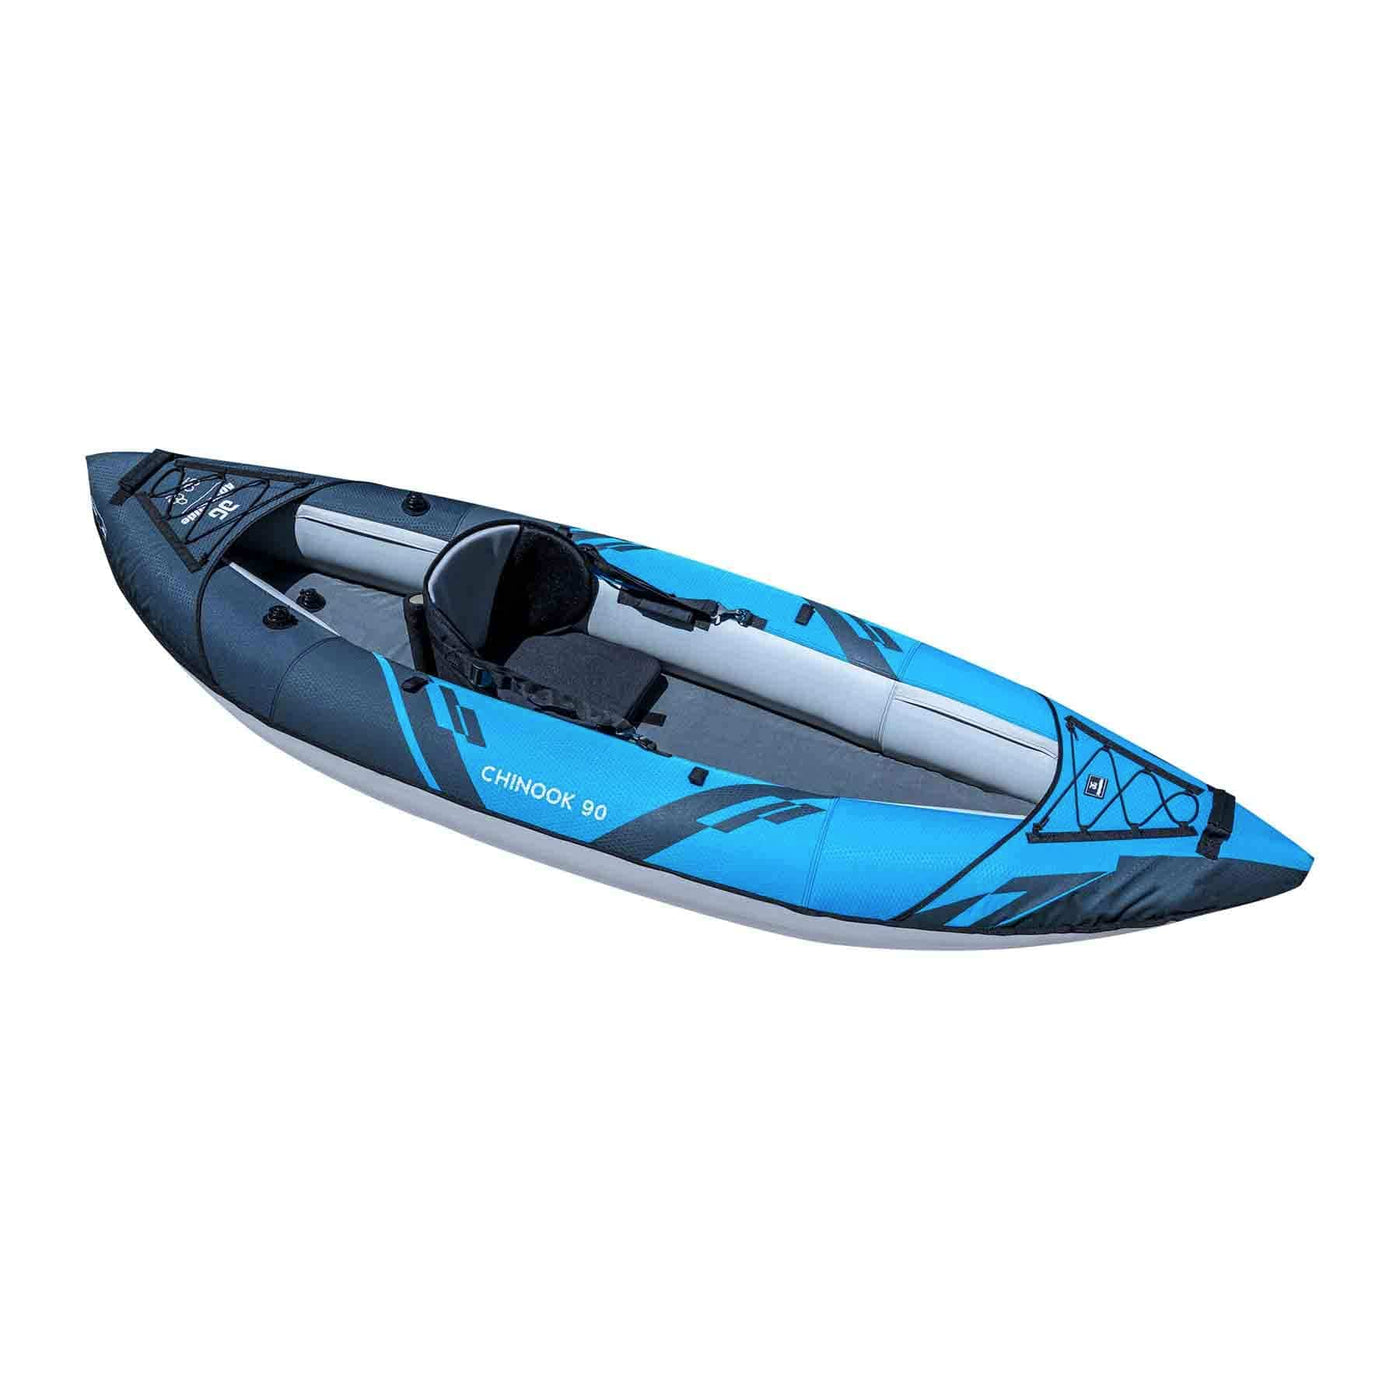 Aquaglide Chinook 90 One Person Inflatable Kayak Aquaglide